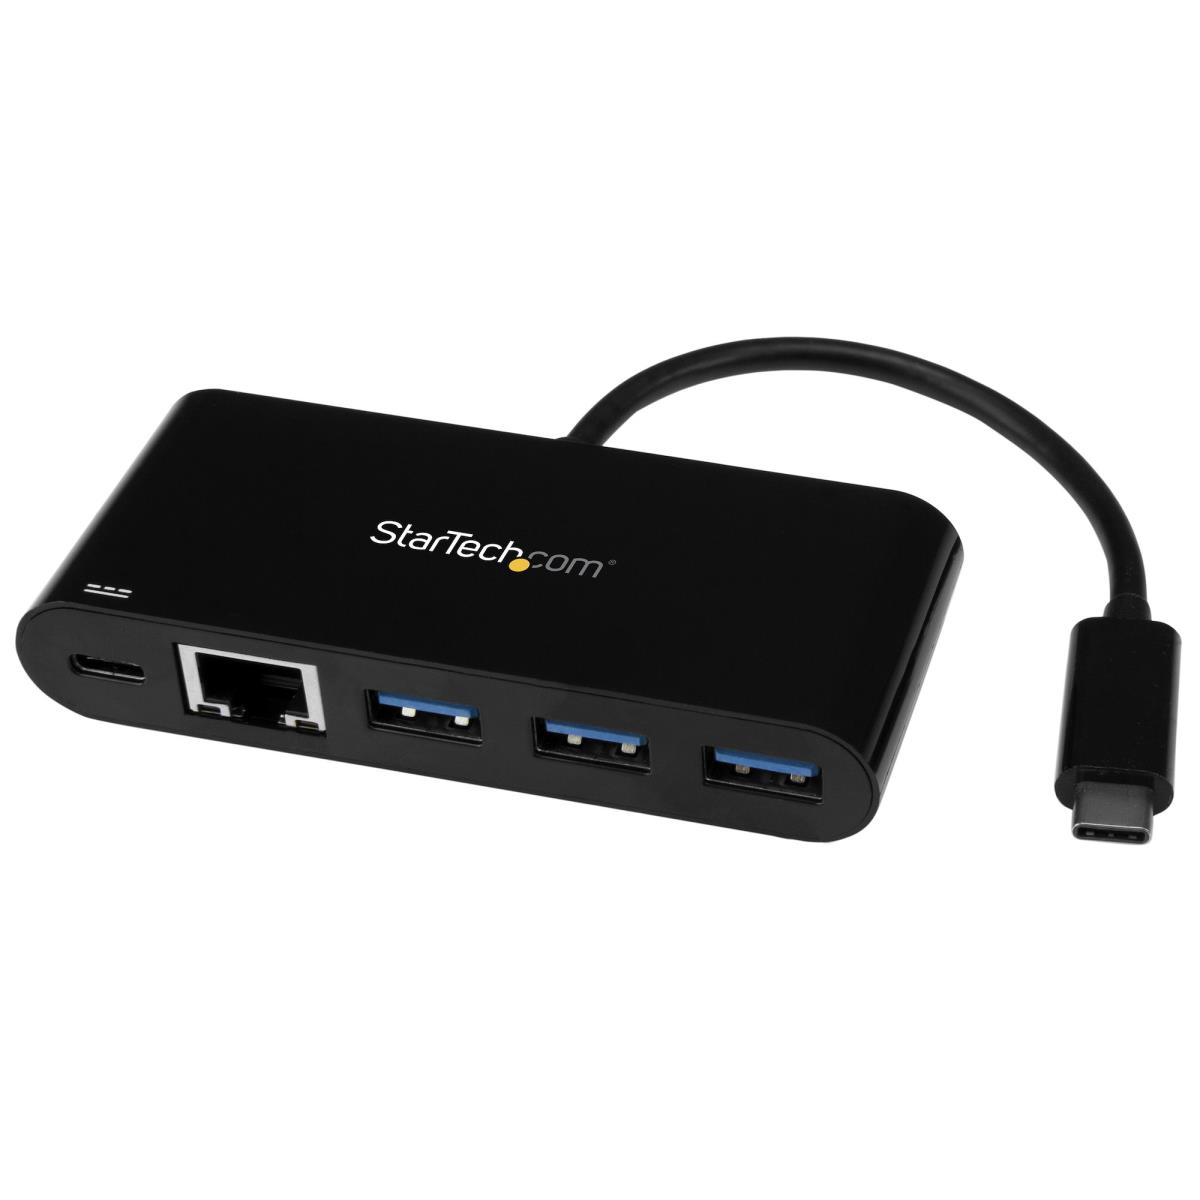 STARTECH.COM USB-c To Ethernet Adapter With 3-port USB 3.0 Hub And Power  Delivery - US1GC303APD - /en